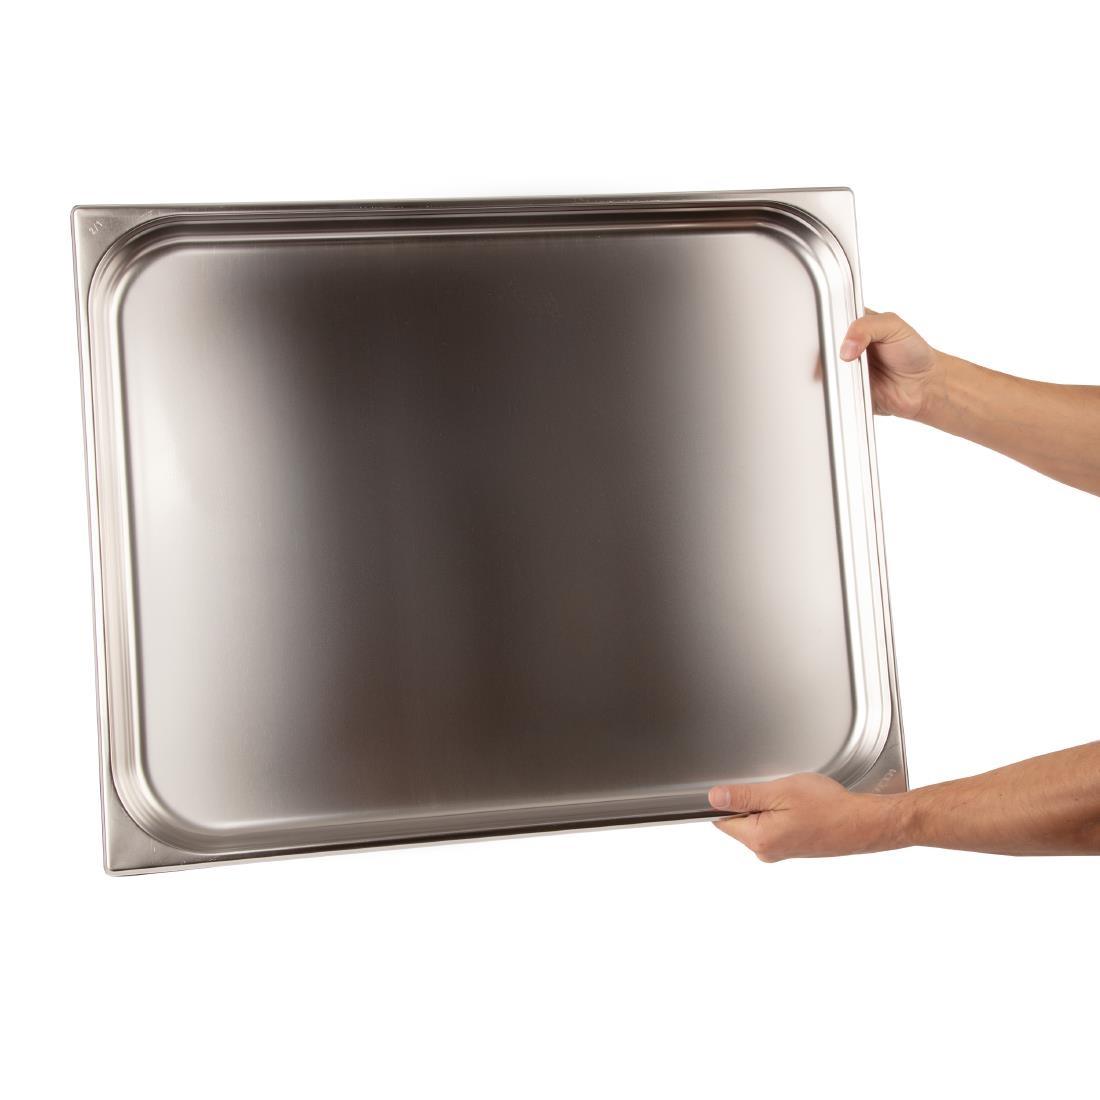 Vogue Stainless Steel 2/1 Gastronorm Pan 40mm - K801  - 4